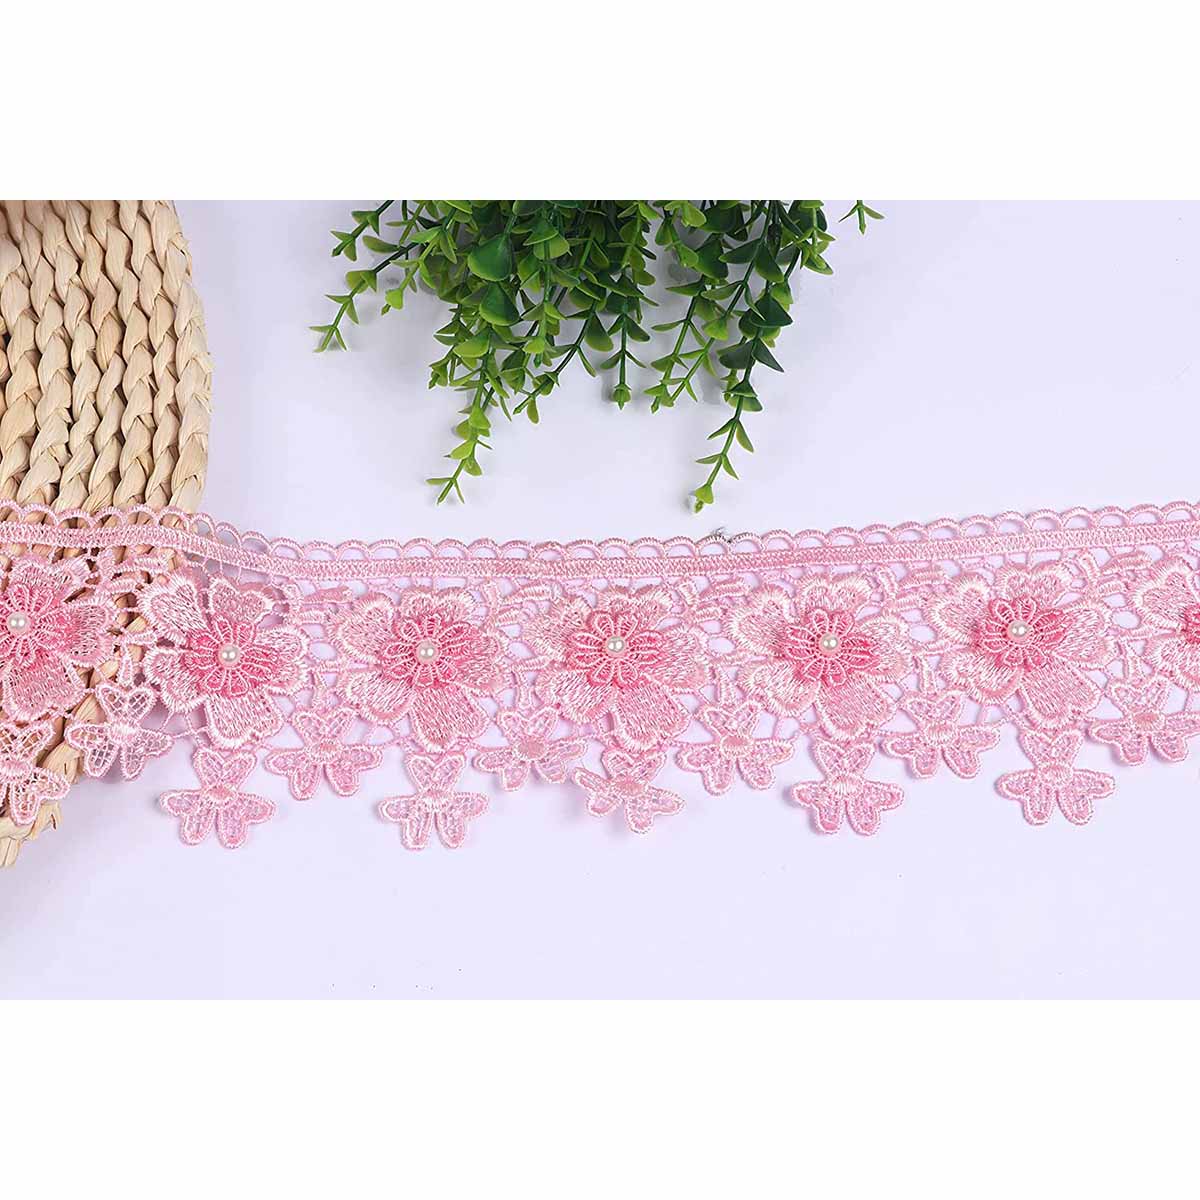 2 Yards Two-layer Flower Lace Trim 3.5″ Wide-Baby Pink